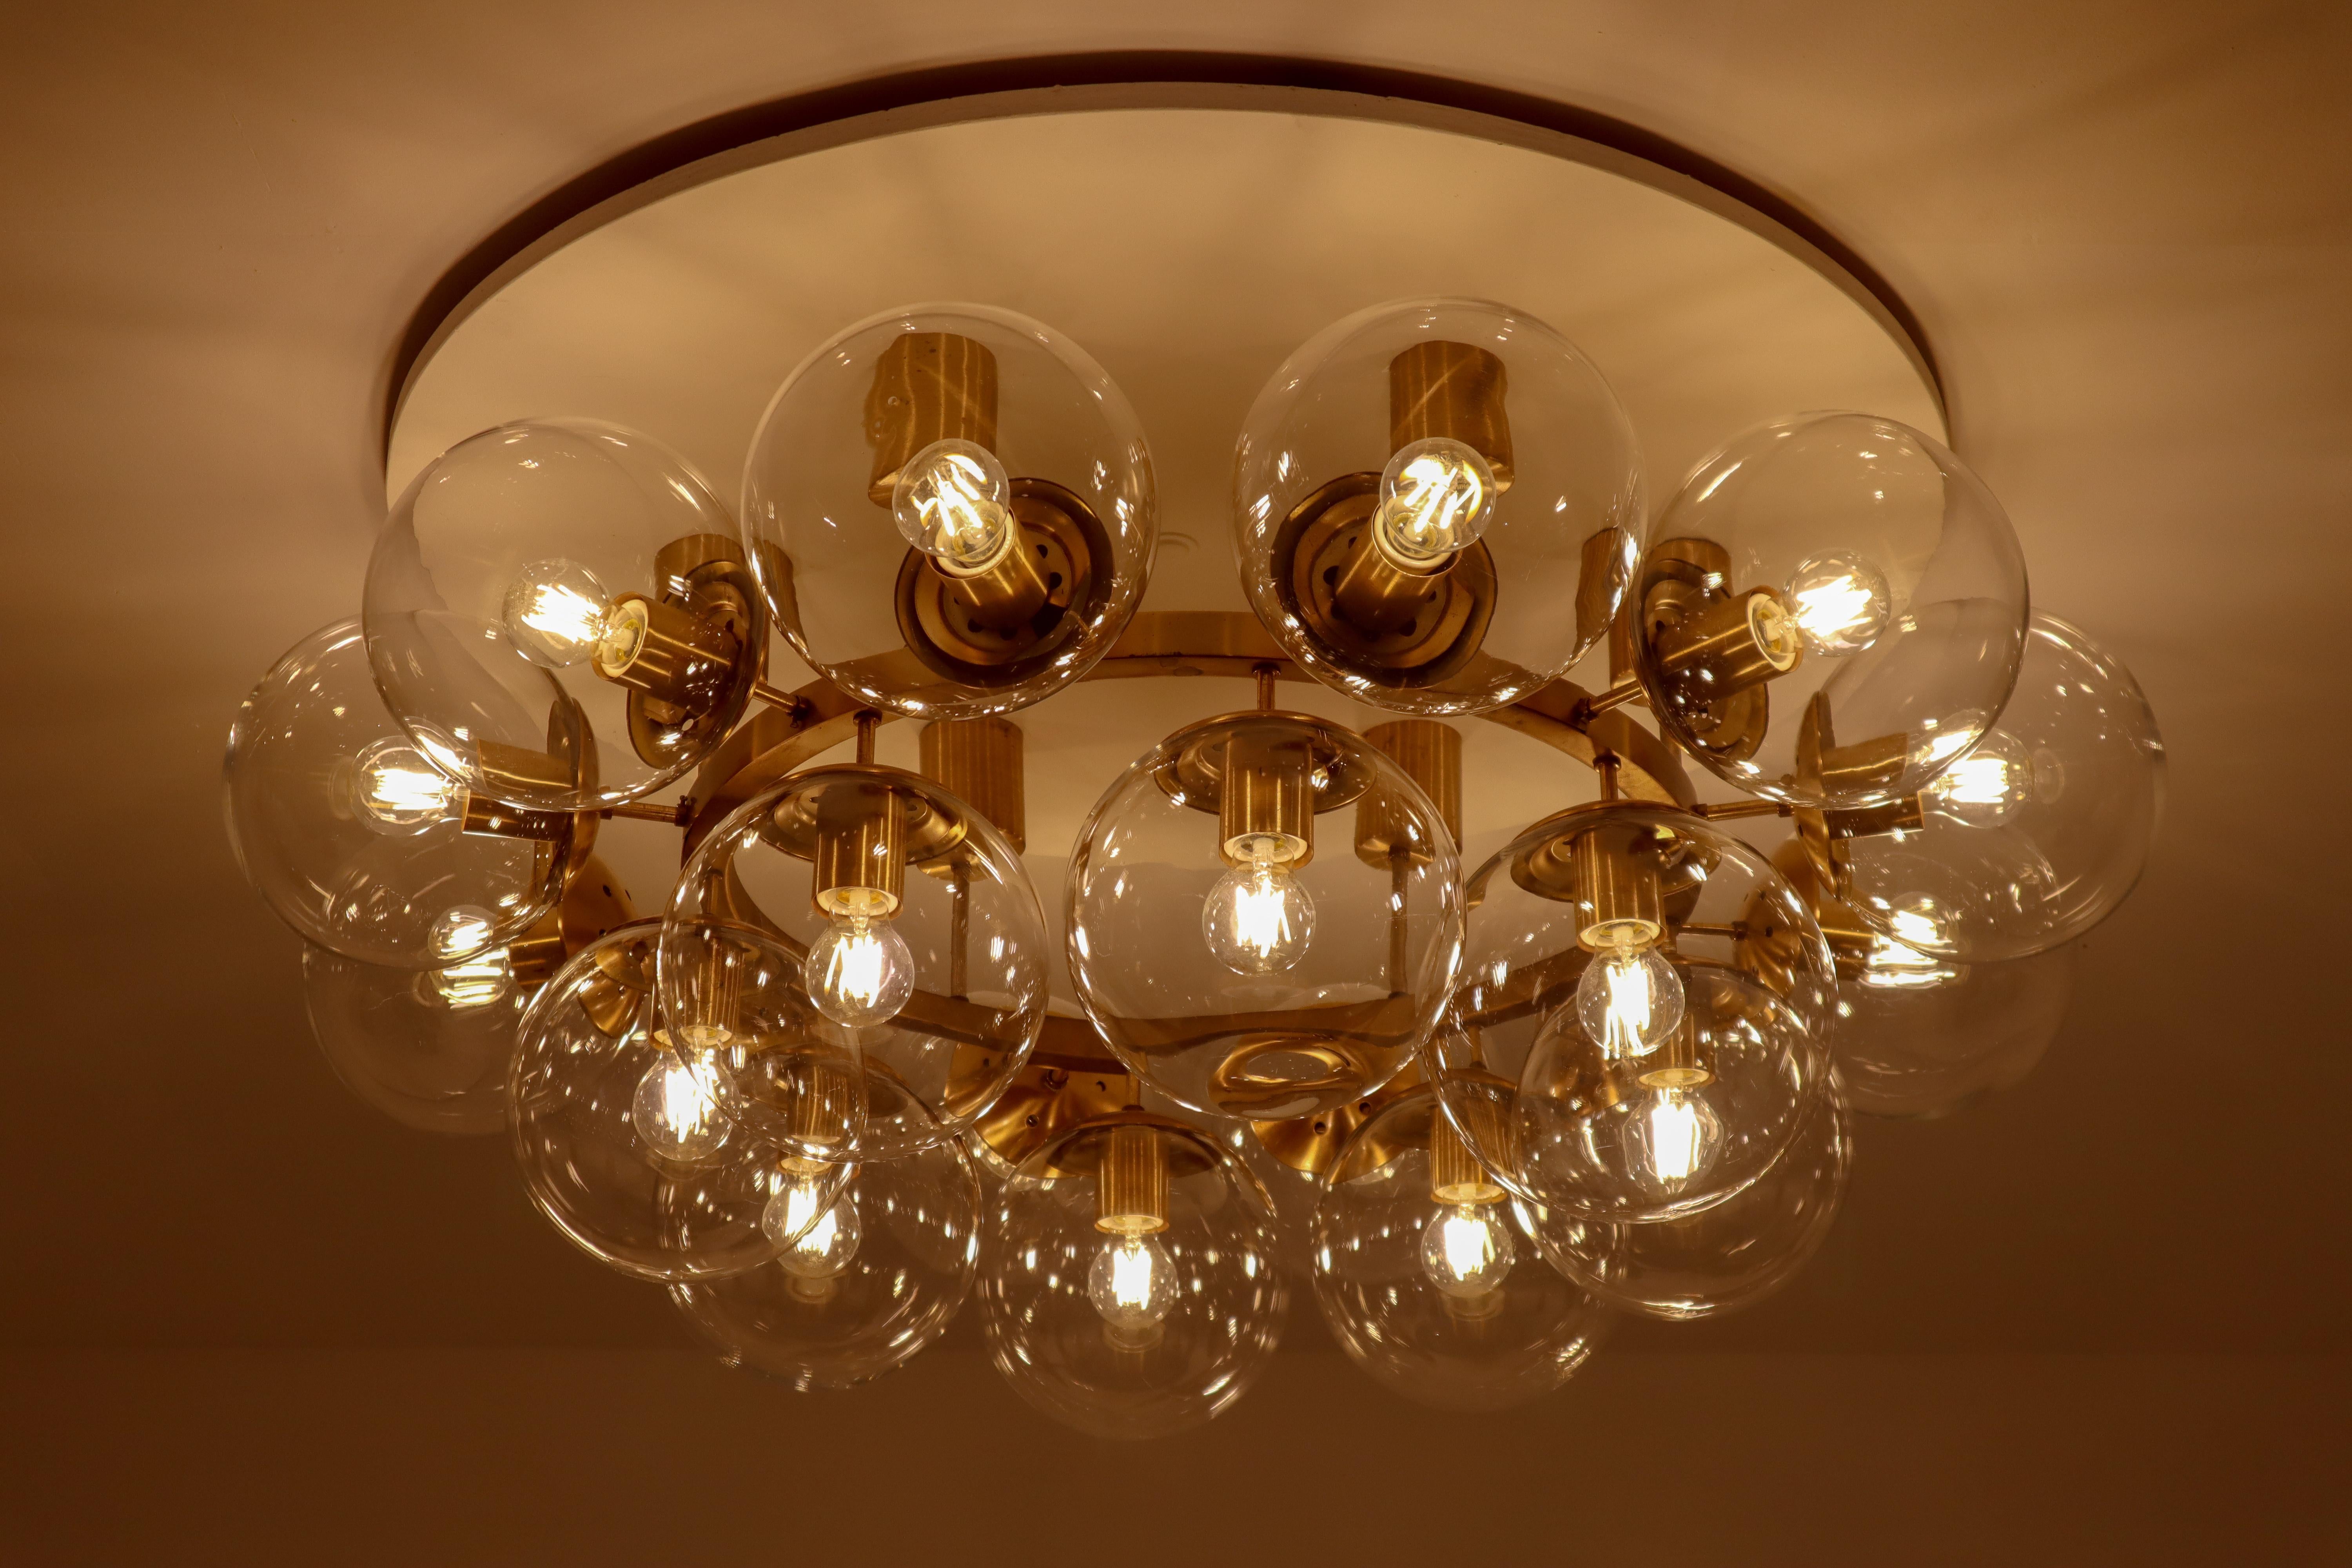 Large Hotel Chandelier in Brass Fixture and 20 Large Hand-Blowed Glass Globes  4